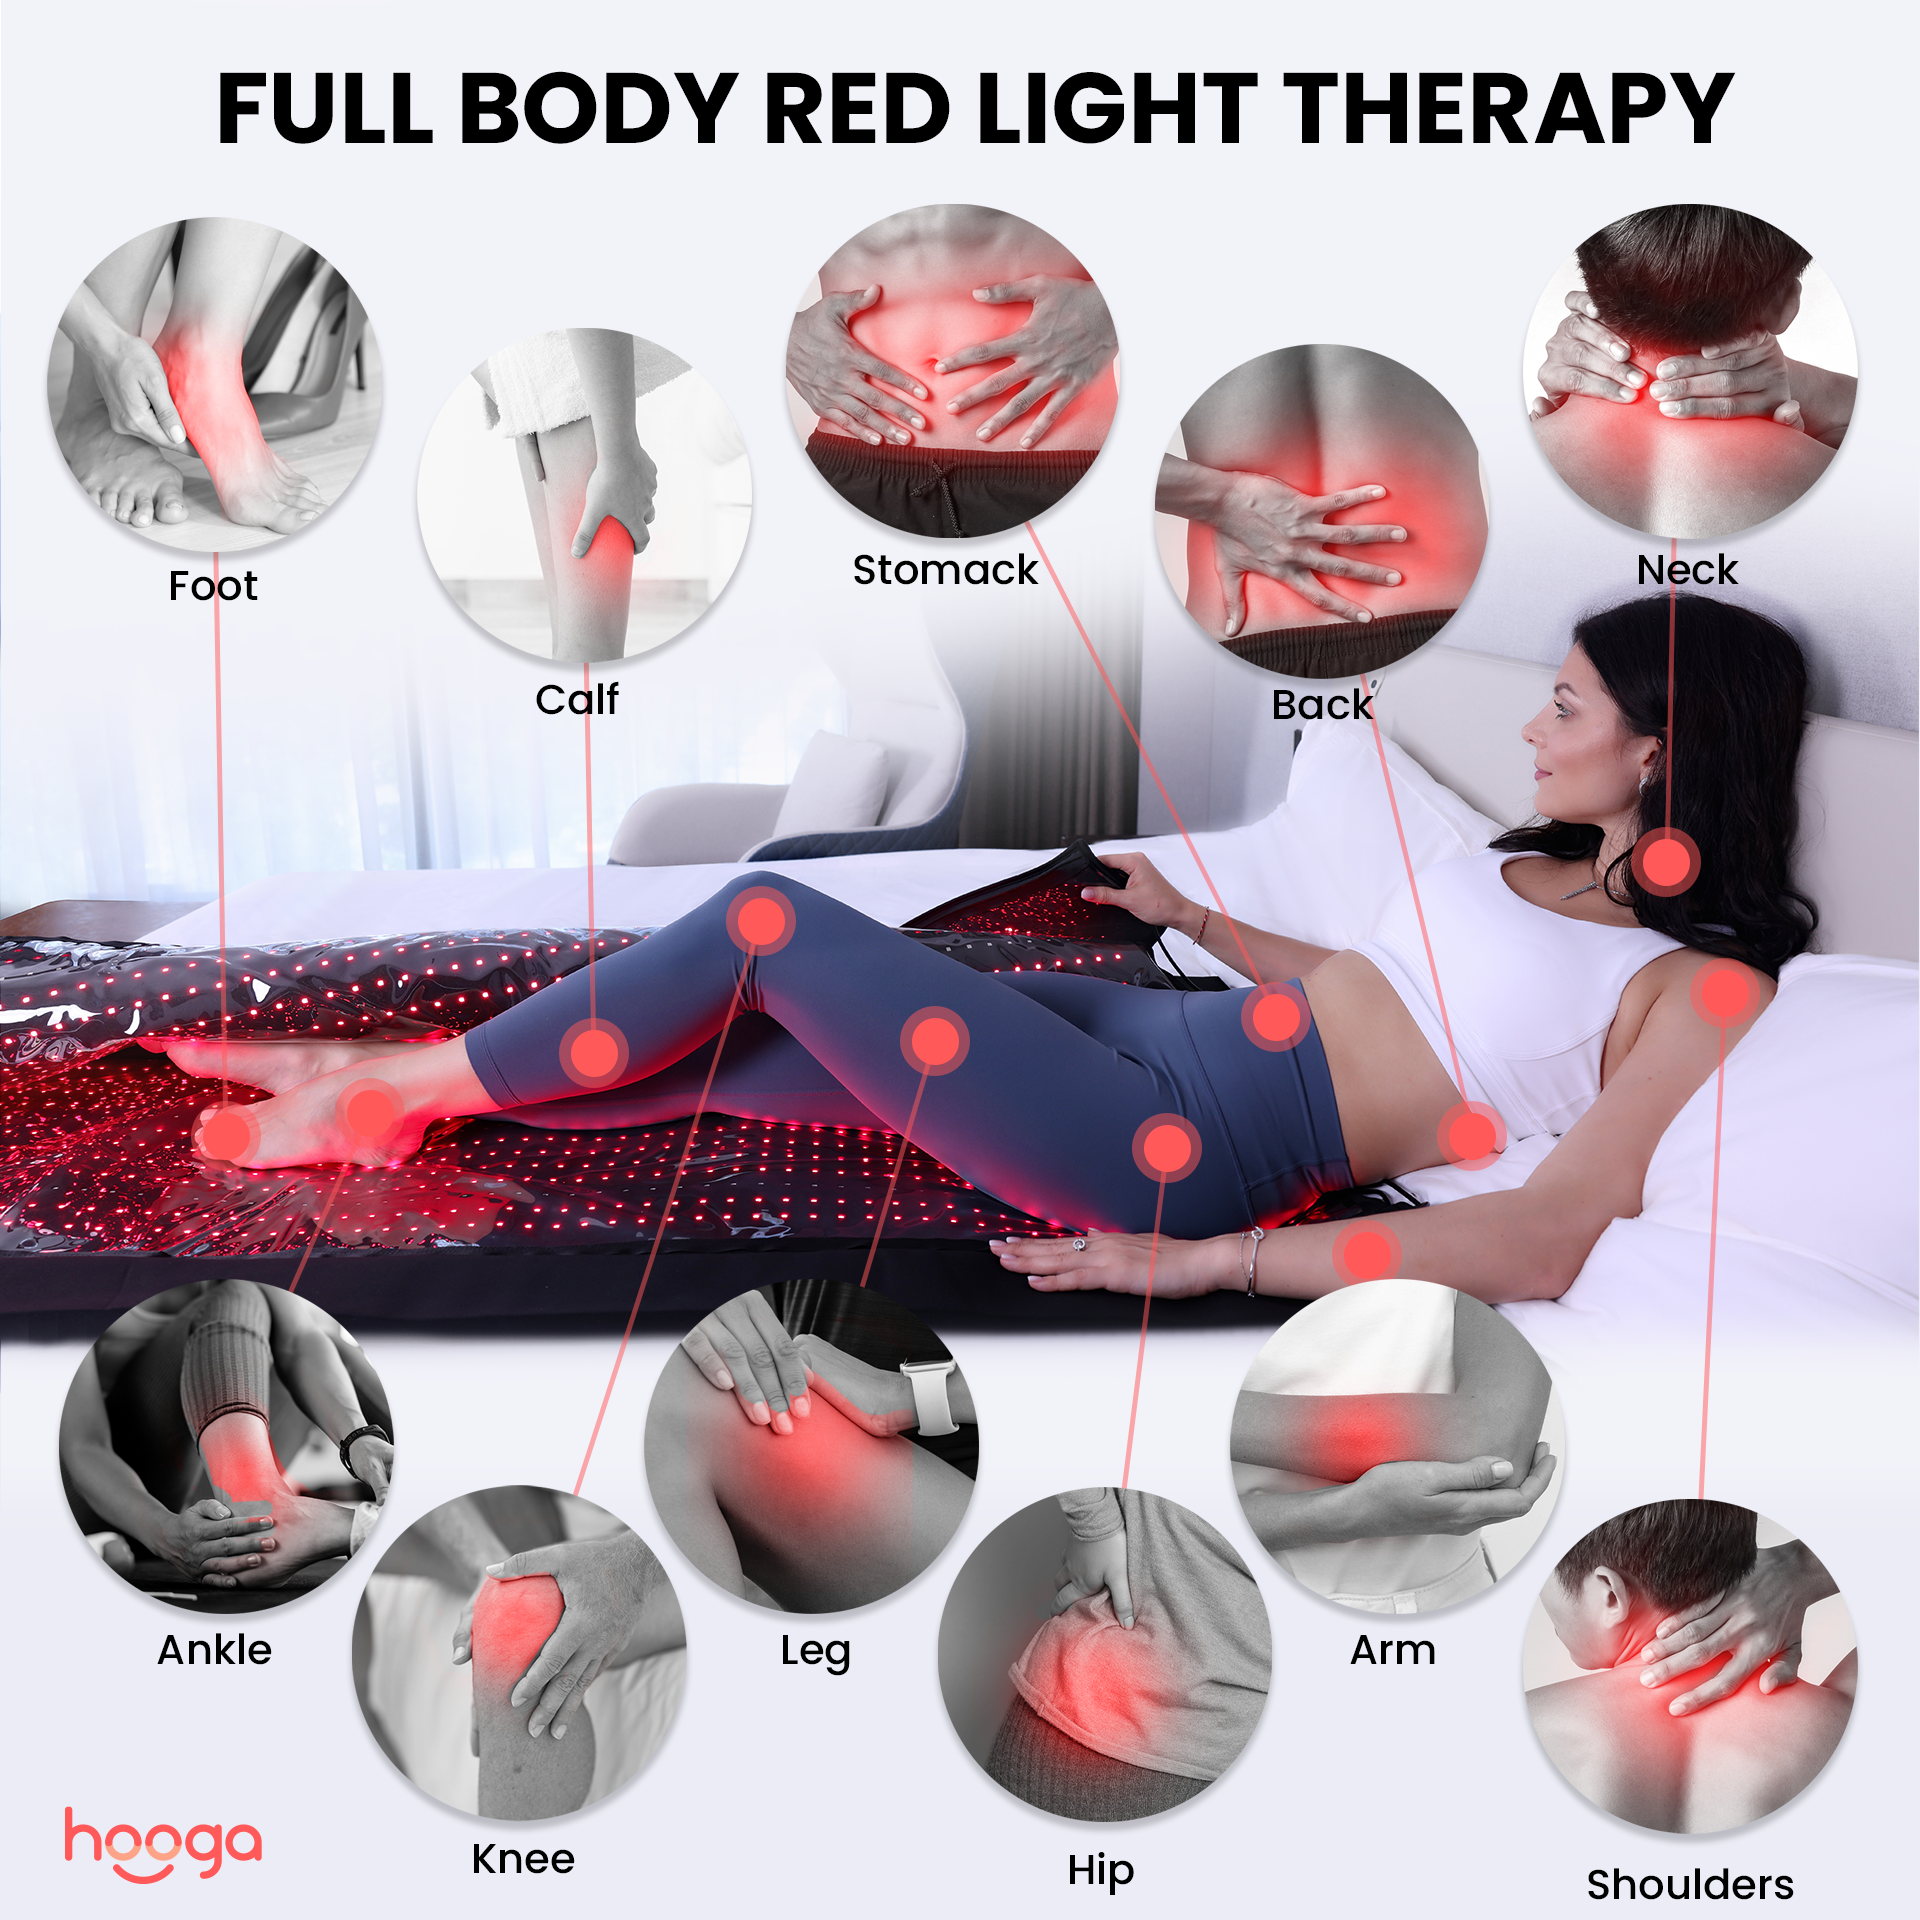 Hooga Red Light Therapy Blanket Pod Full Body Light Therapy Treatment